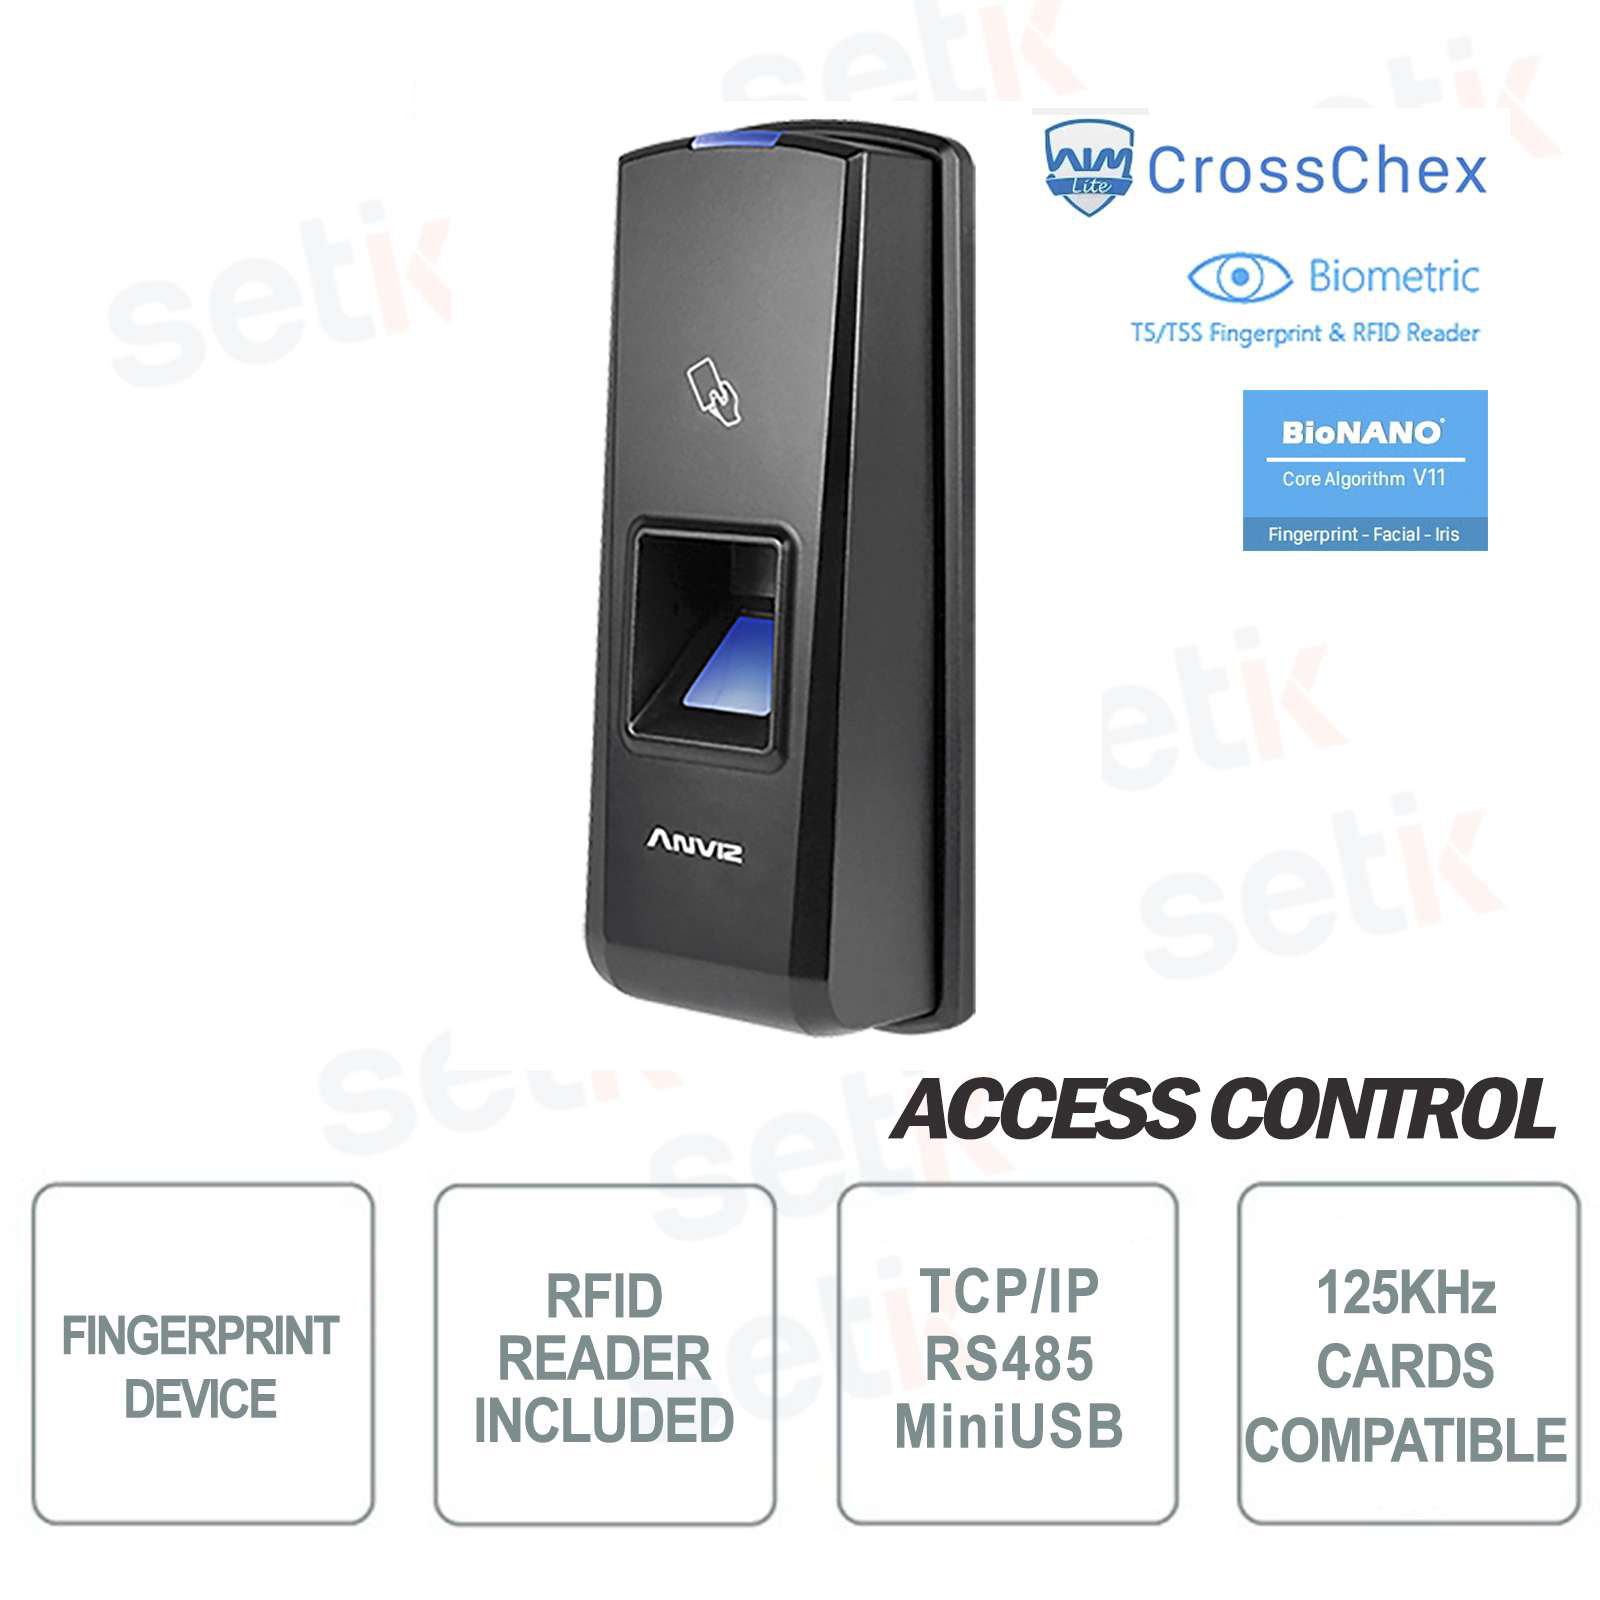 T5-PRO Fingerprint&Rfid Controller Stand alone Security Access Control 